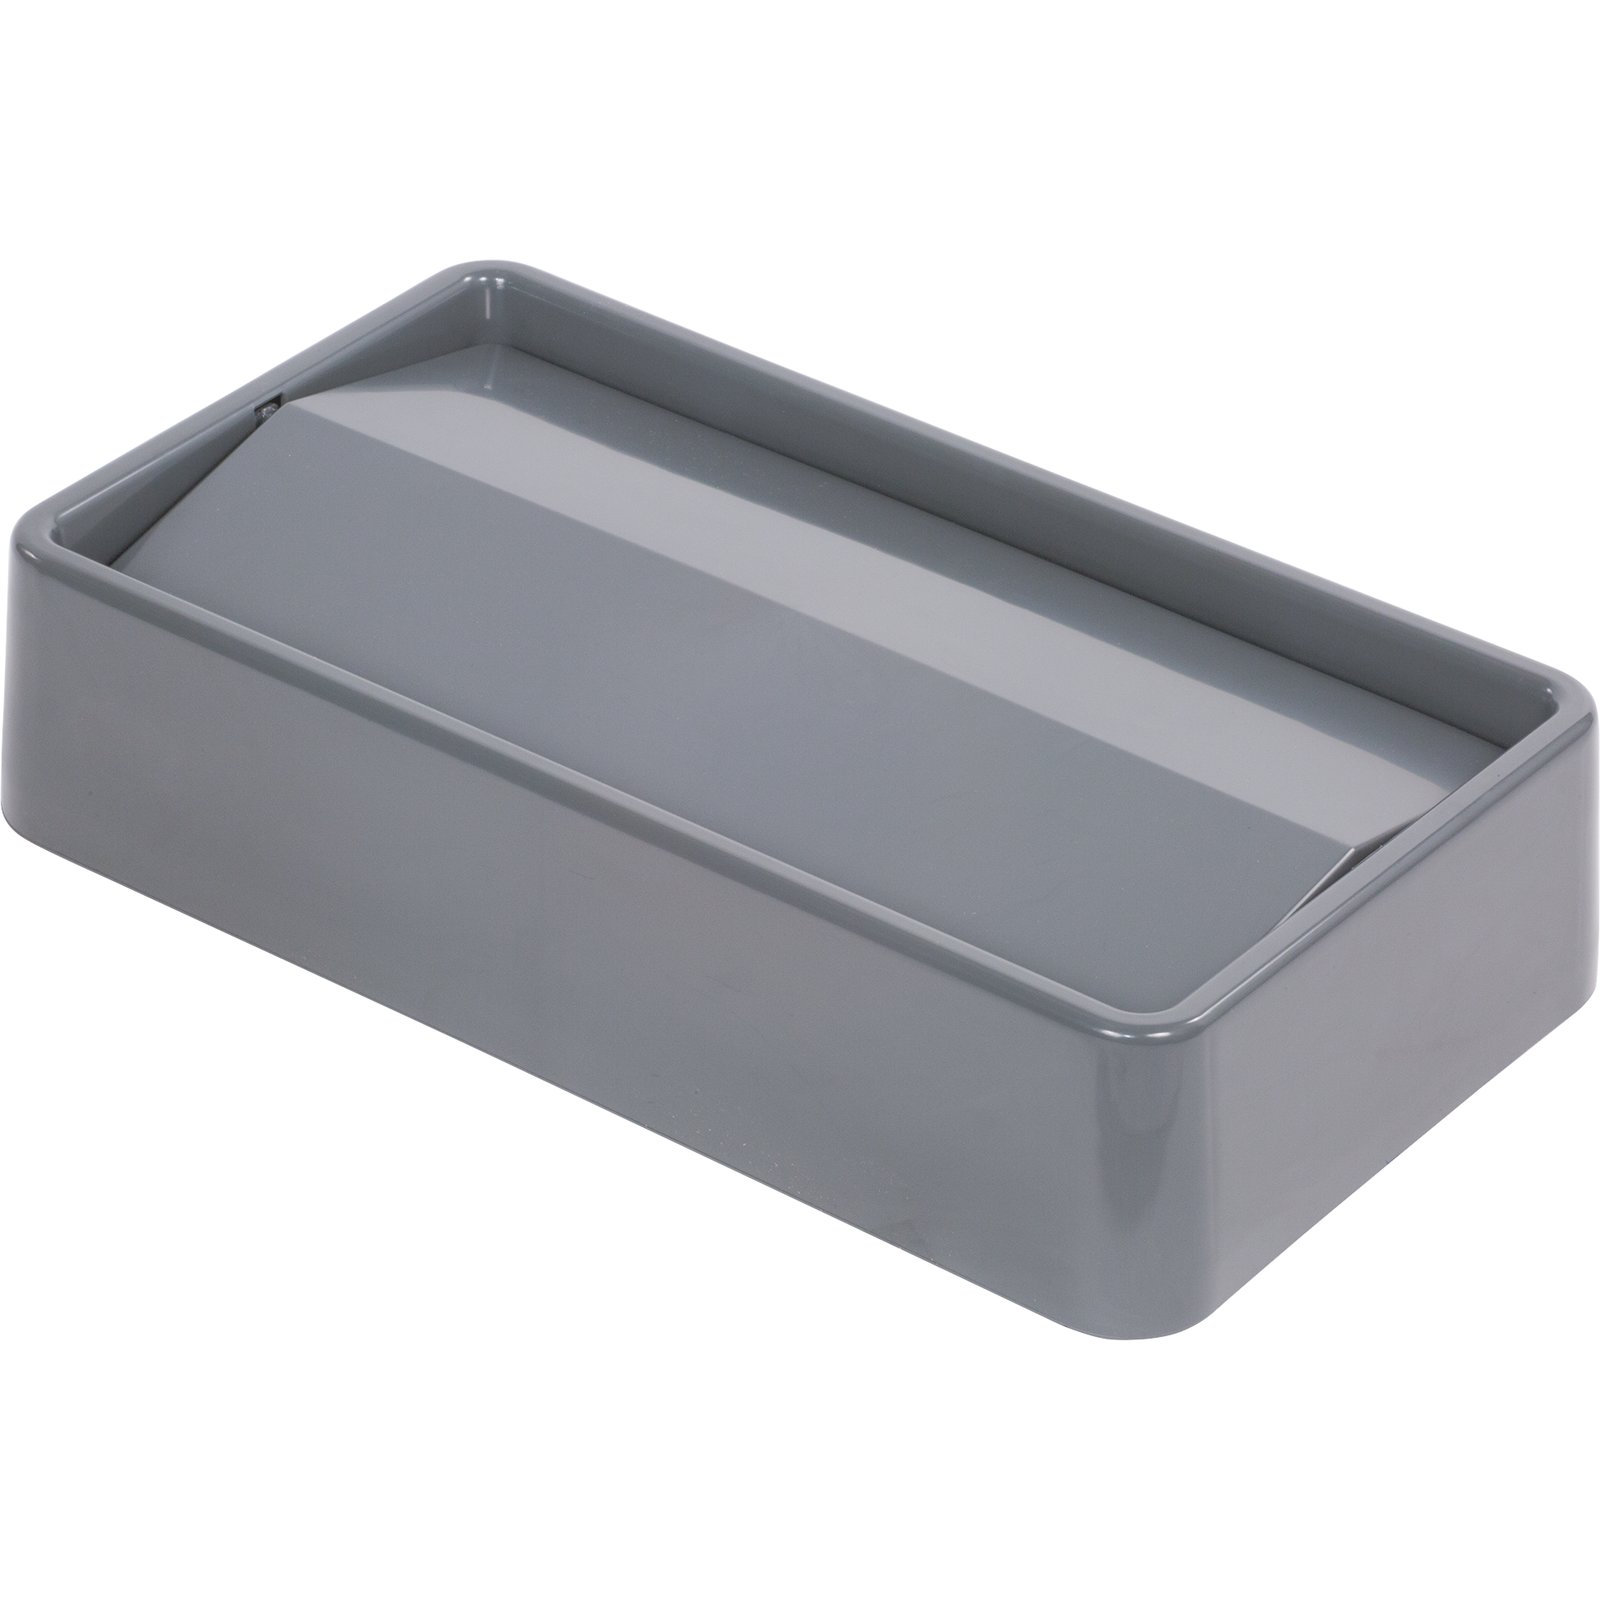 34202423 - TrimLine™ Rectangle Swing Top Waste Container Trash Can